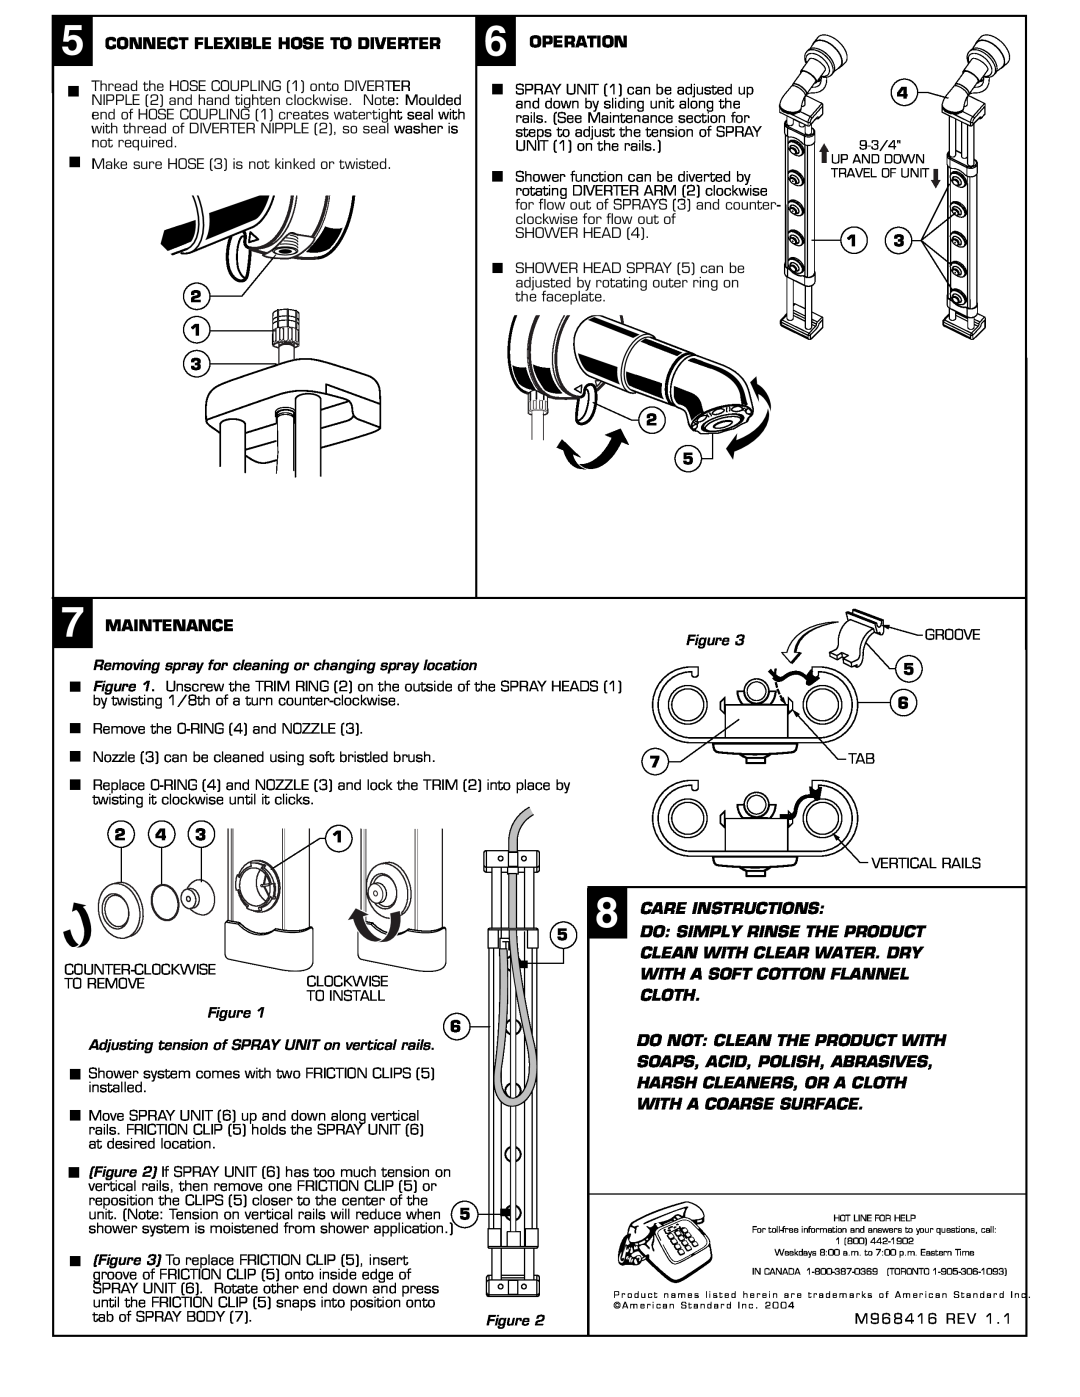 American Standard 6035 Connect Flexible Hose To Diverter, Operation, Maintenance, Care Instructions 